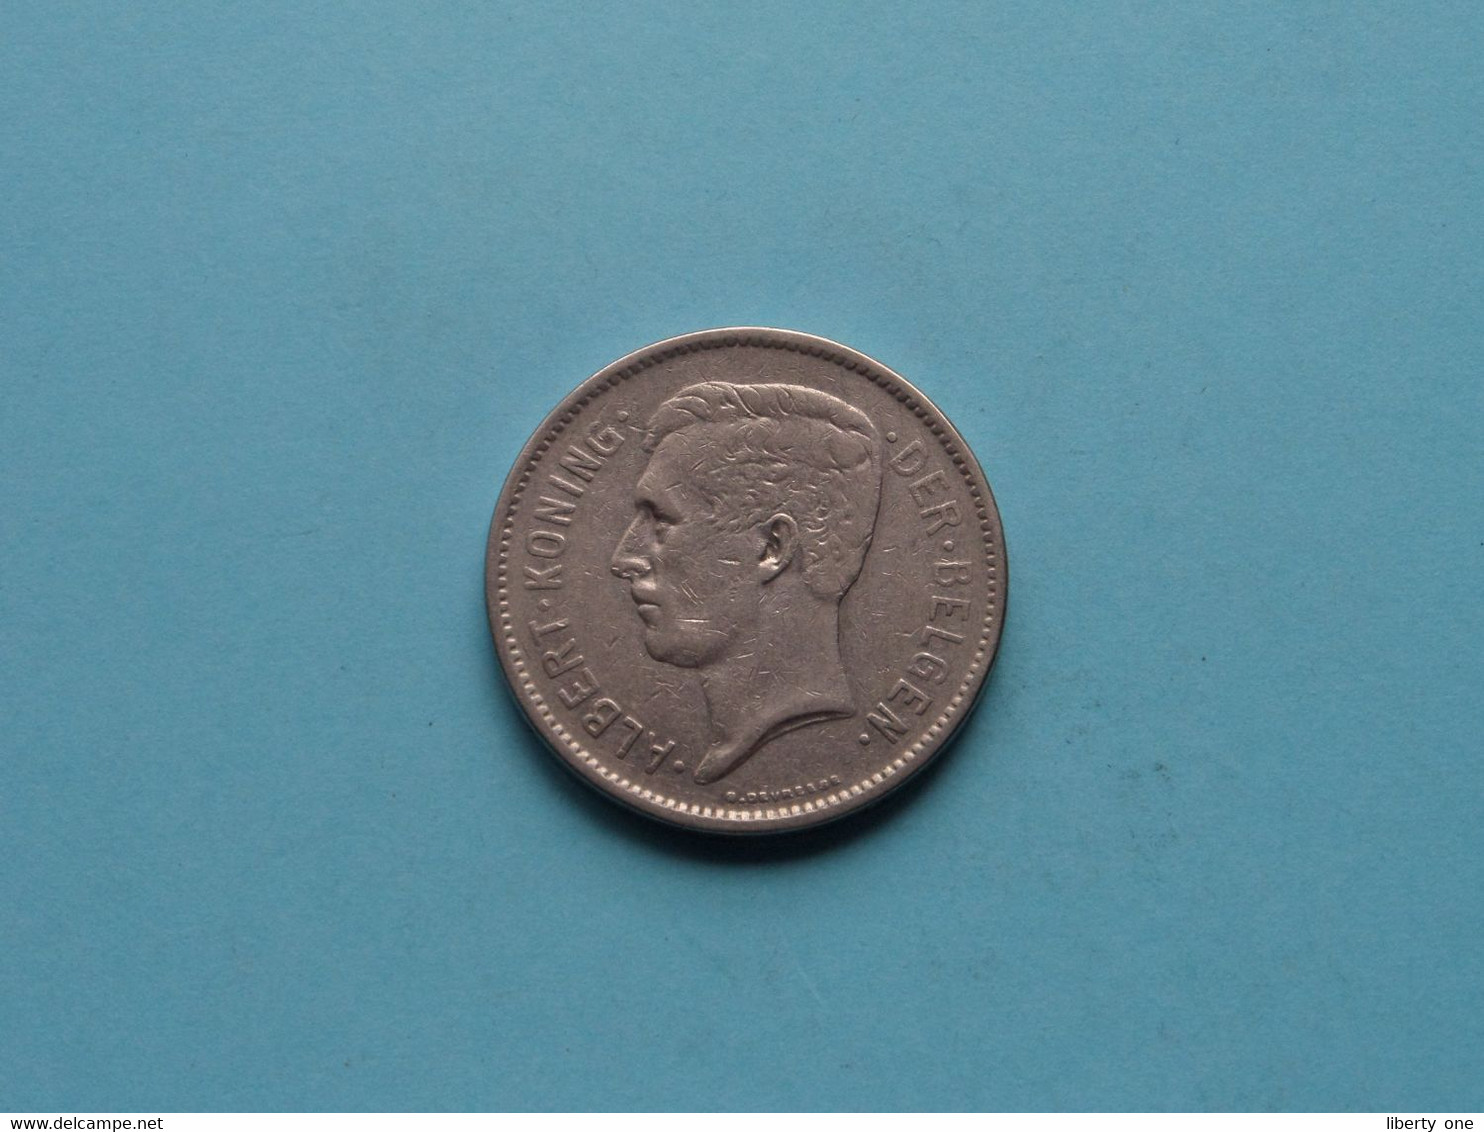 1931 VL - 5 Frank / KM 98 > ( Uncleaned Coin / For Grade, Please See Photo ) ! - 5 Francs & 1 Belga